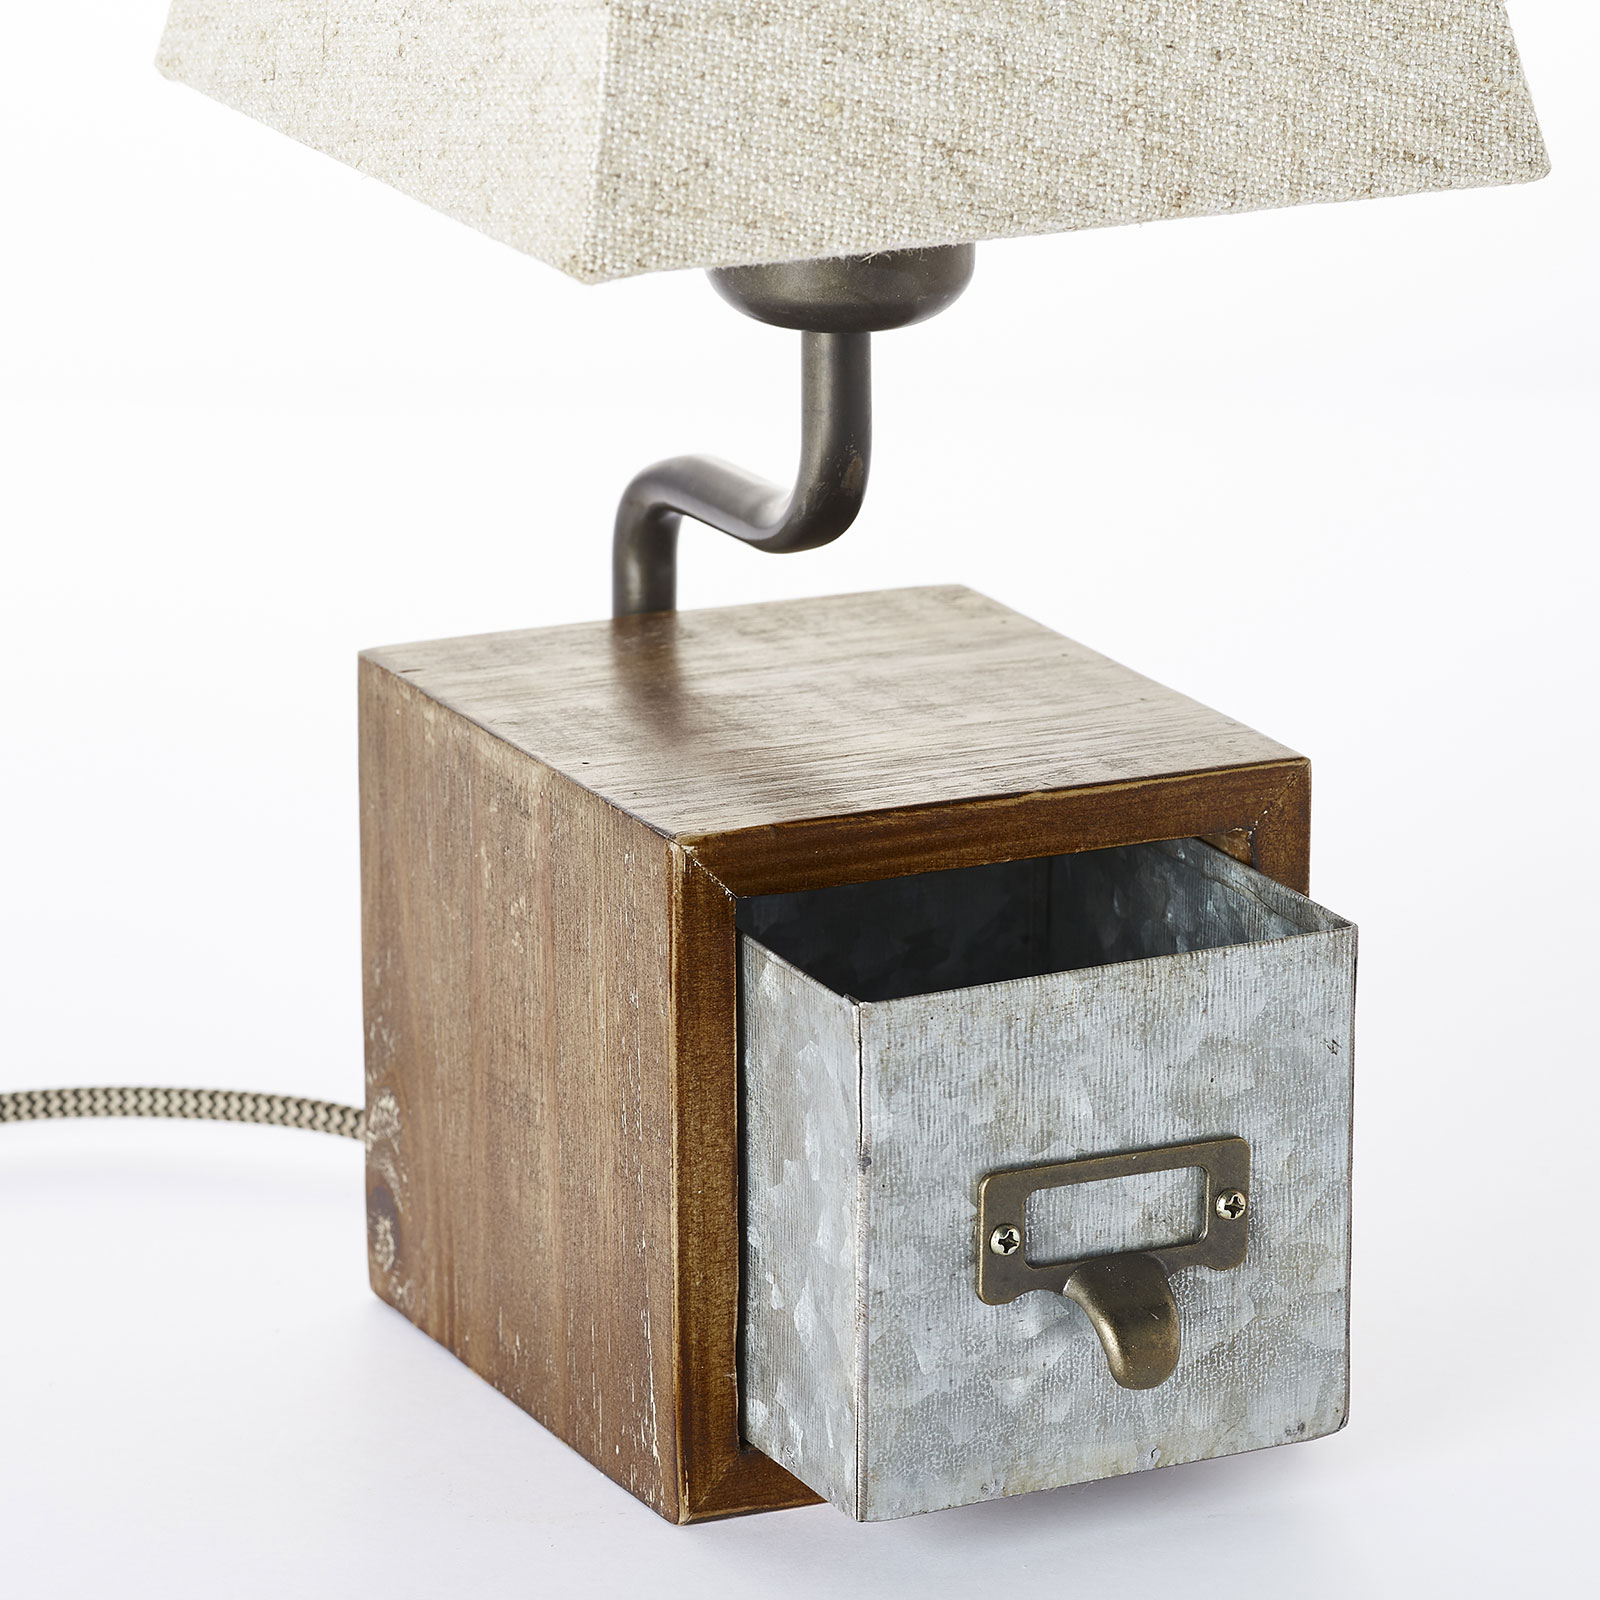 Casket fabric table lamp with a drawer